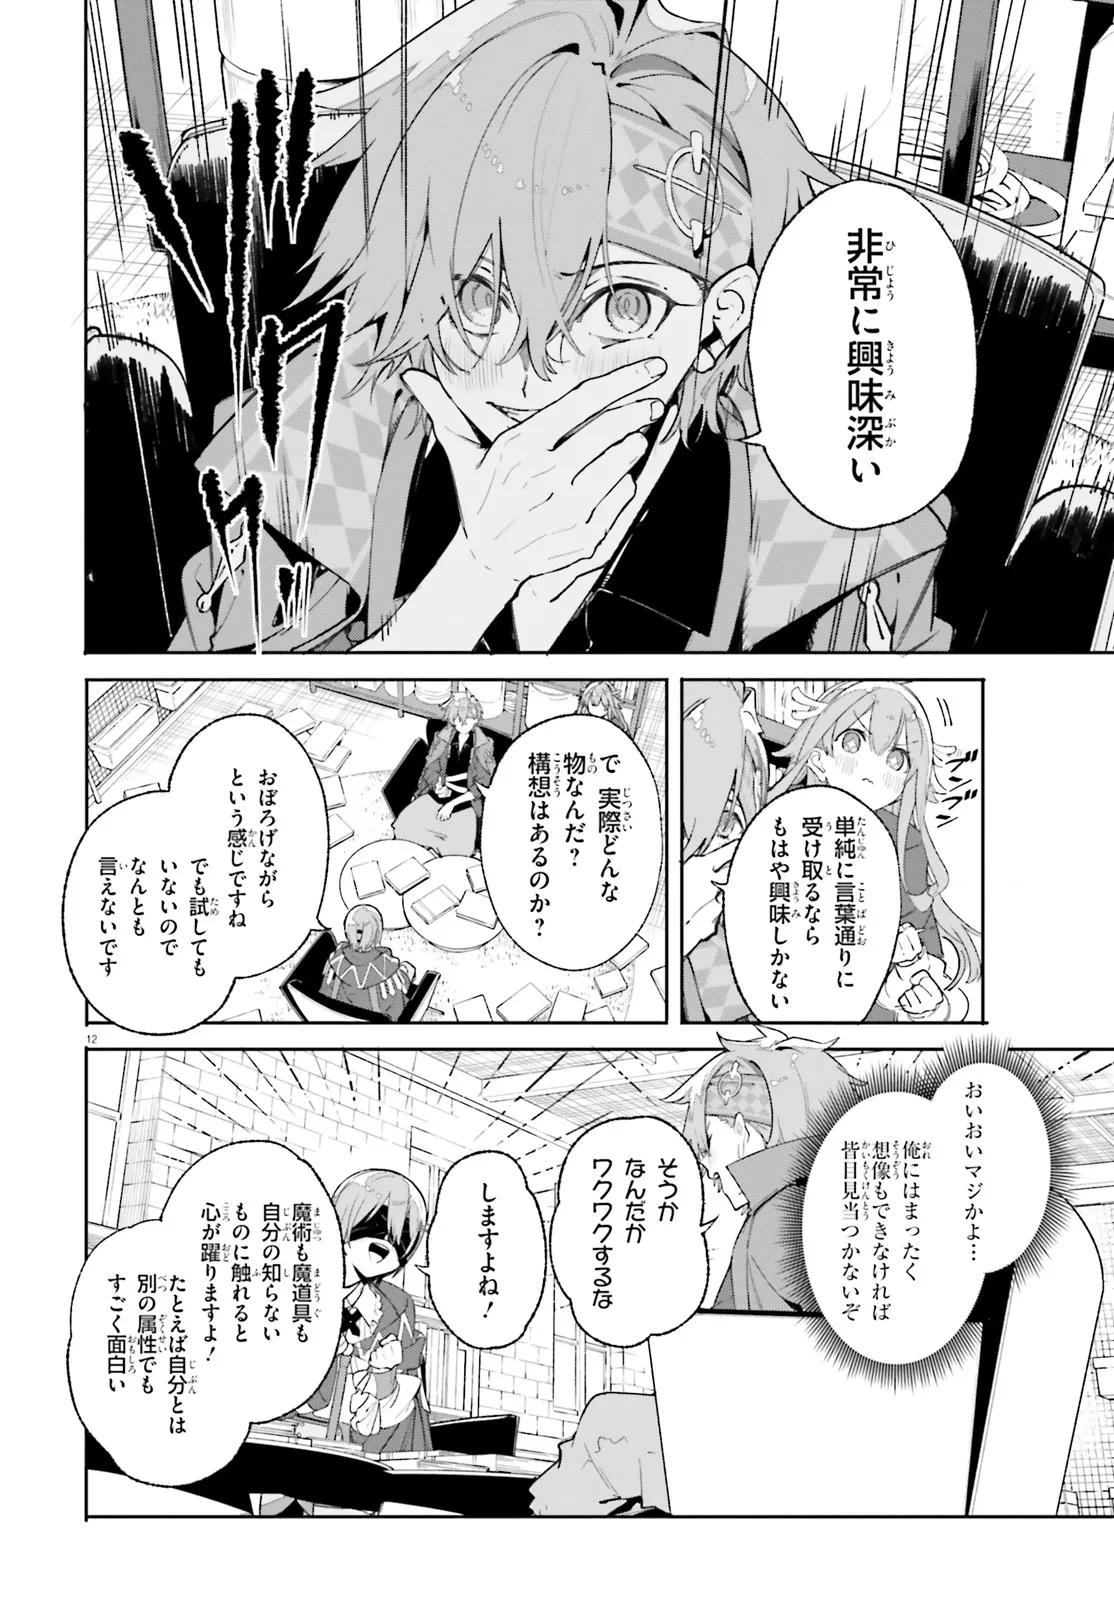 Kunon the Sorcerer Can See Kunon the Sorcerer Can See Through 魔術師クノンは見えている 第26.2話 - Page 2